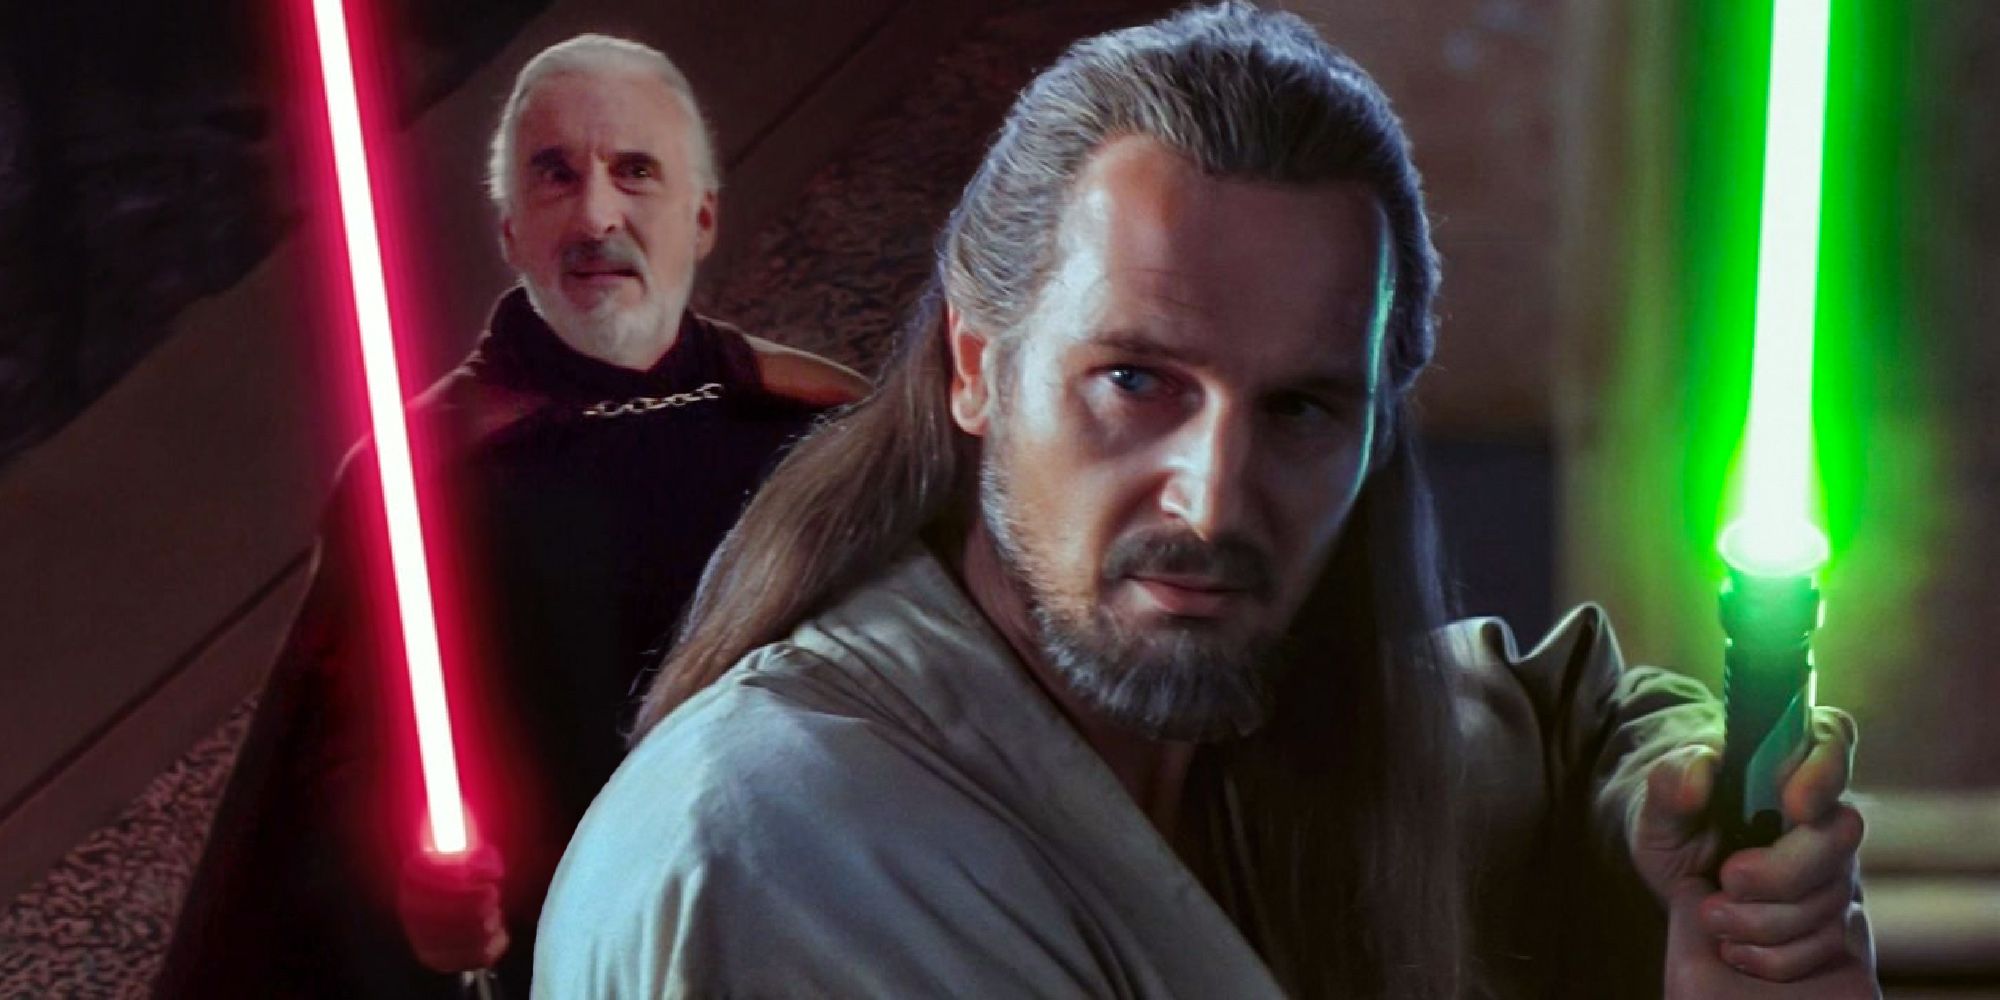 Count Dooku talks about the death of his former apprentice, Qui-Gon Jinn  [Canon; Age of Republic: Count Dooku #1] : r/StarWars